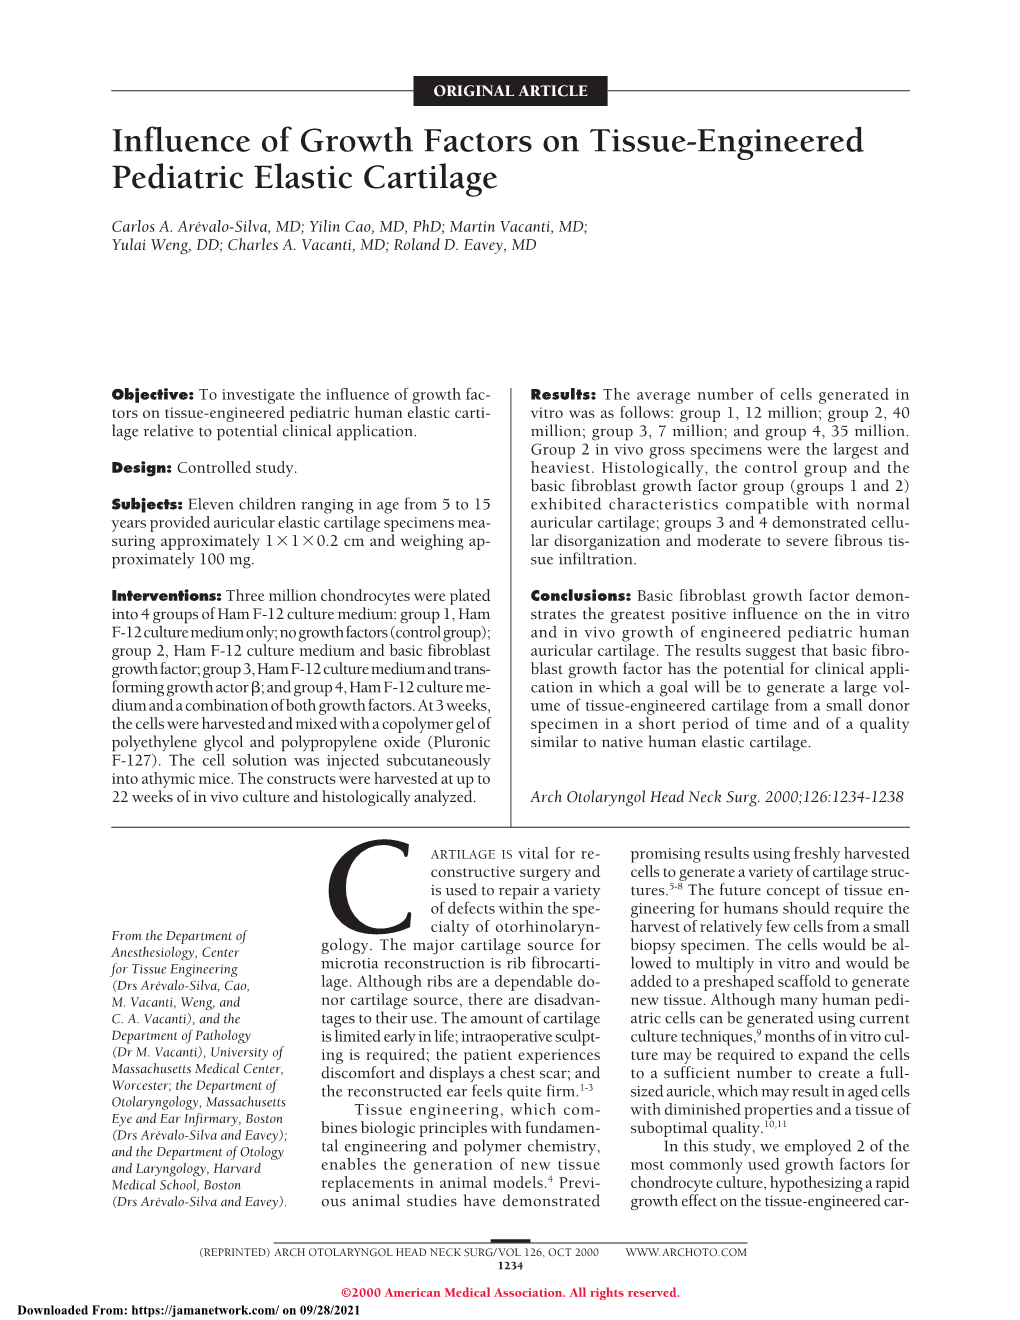 Influence of Growth Factors on Tissue-Engineered Pediatric Elastic Cartilage